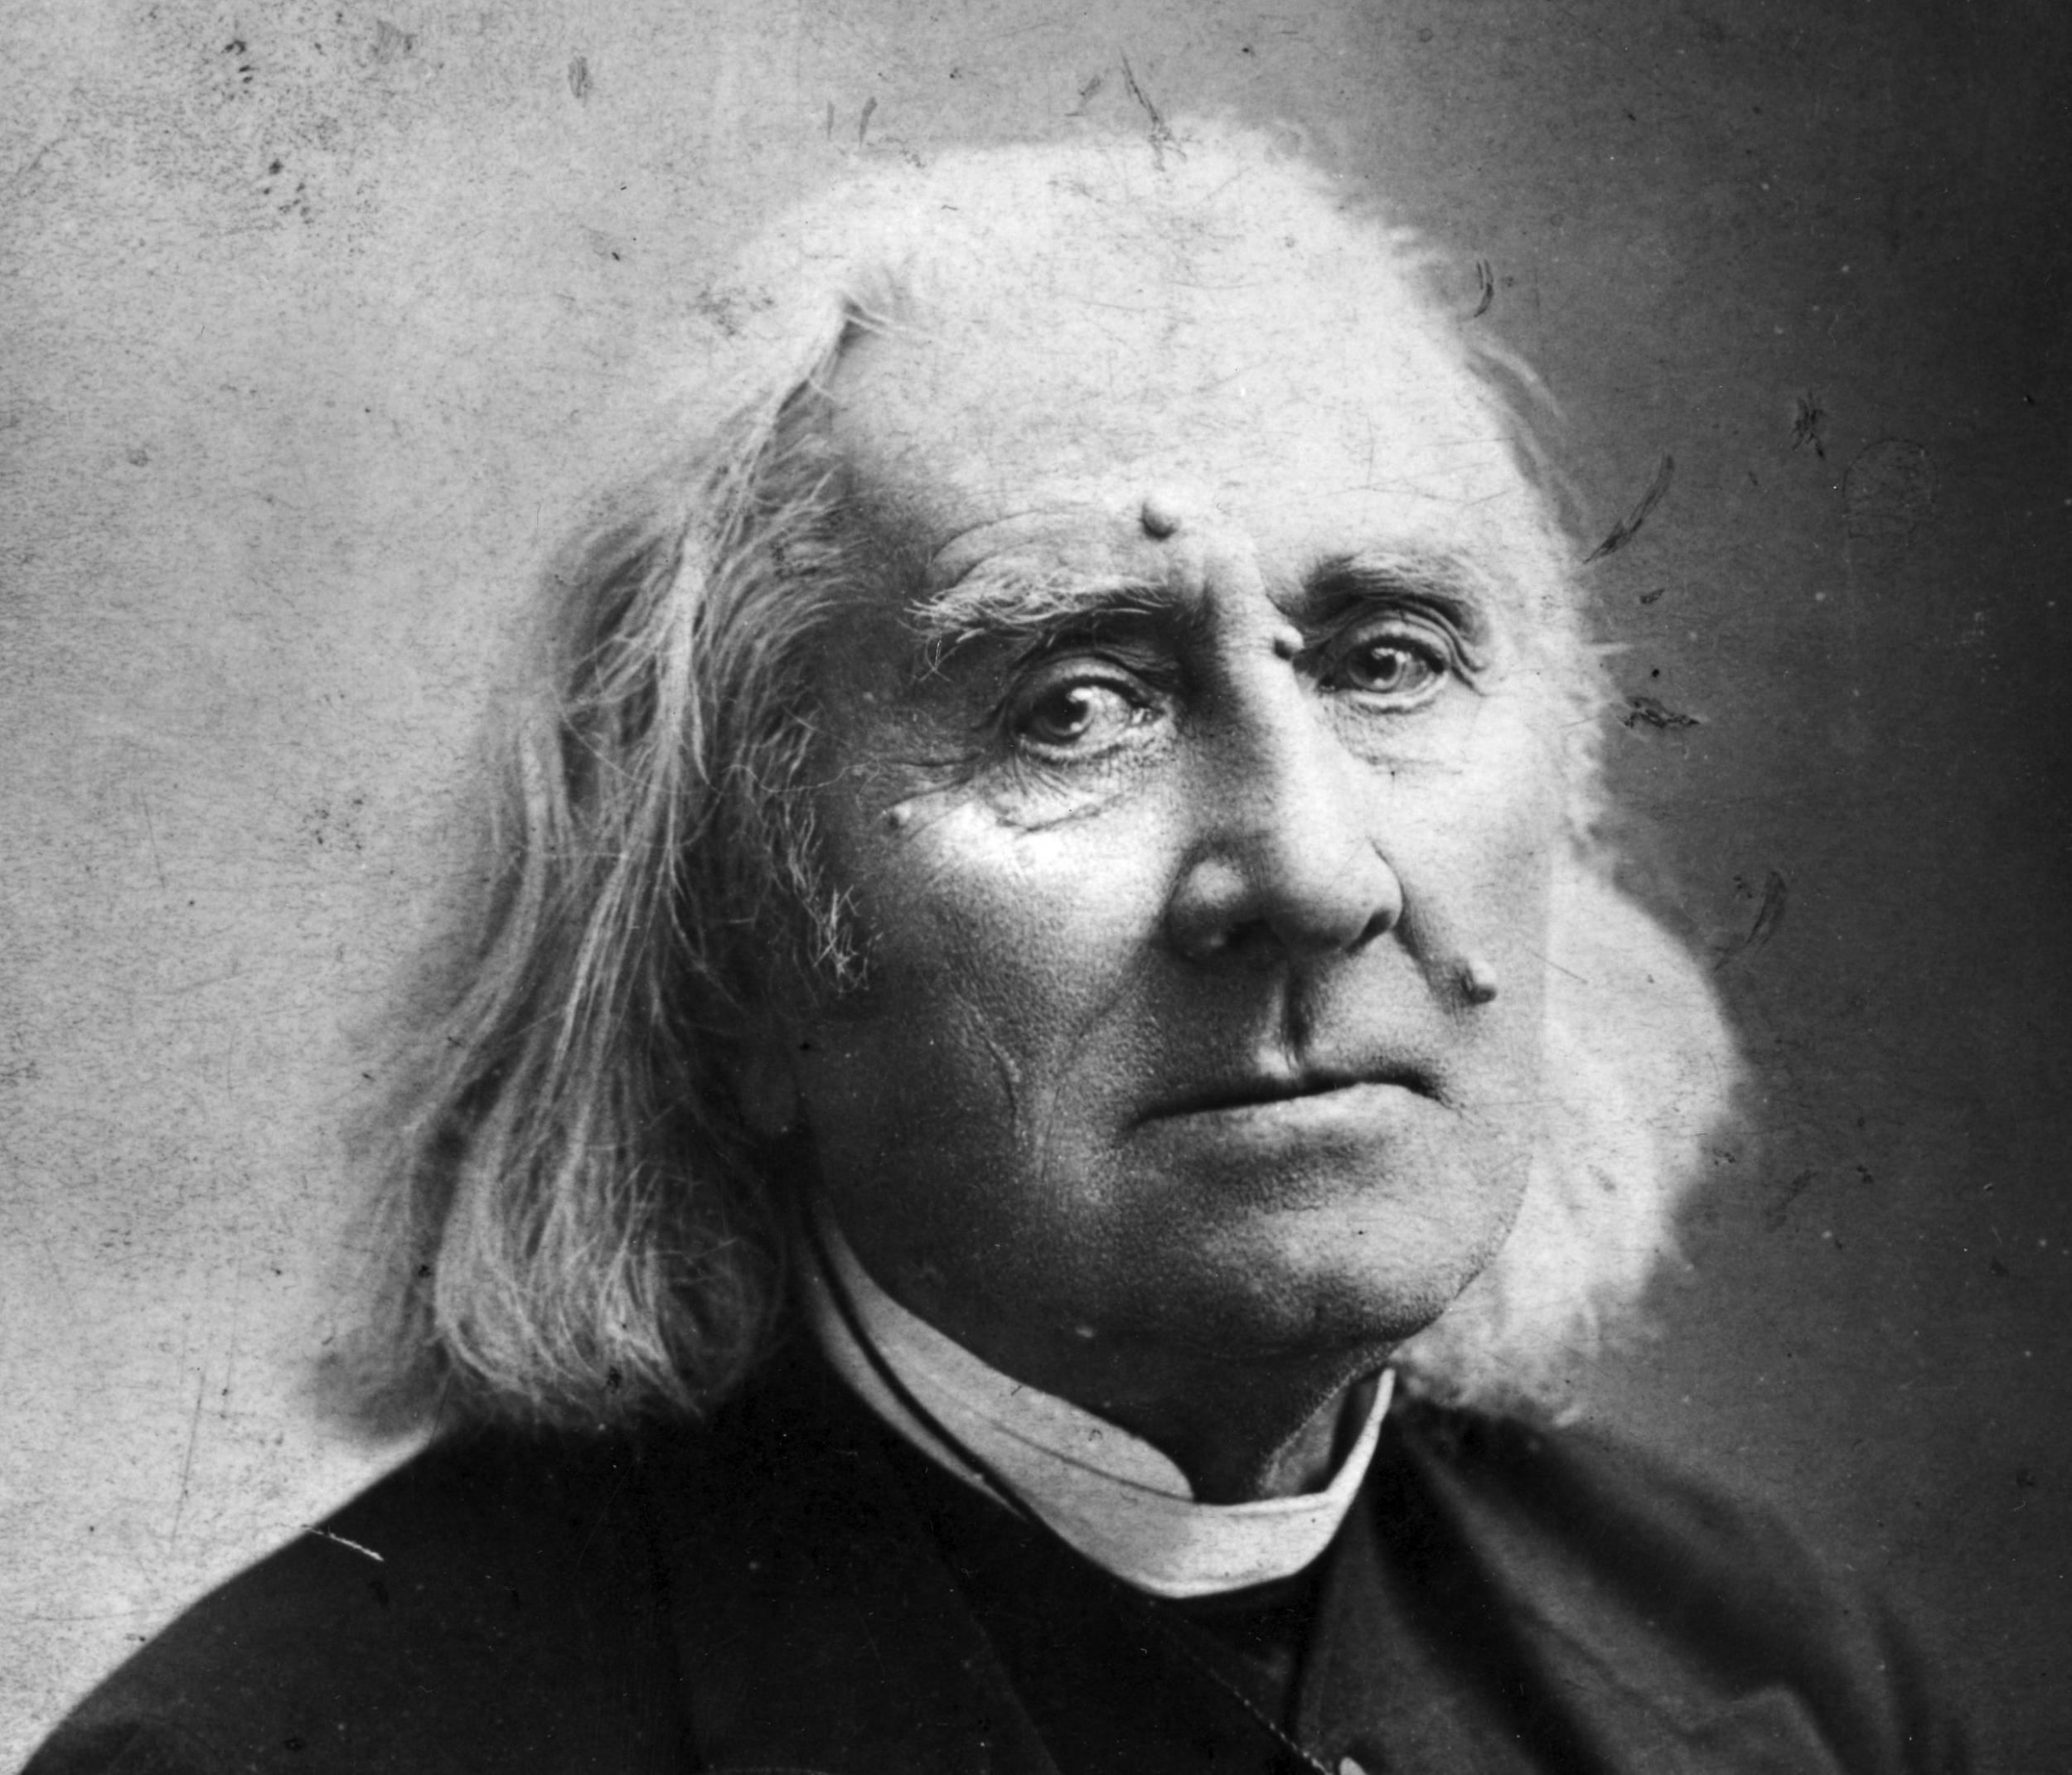 Pianist and Composer Franz Liszt will be celebrated at Lisztomania on Sunday, Oct. 22 in Kimball Recital Hall.